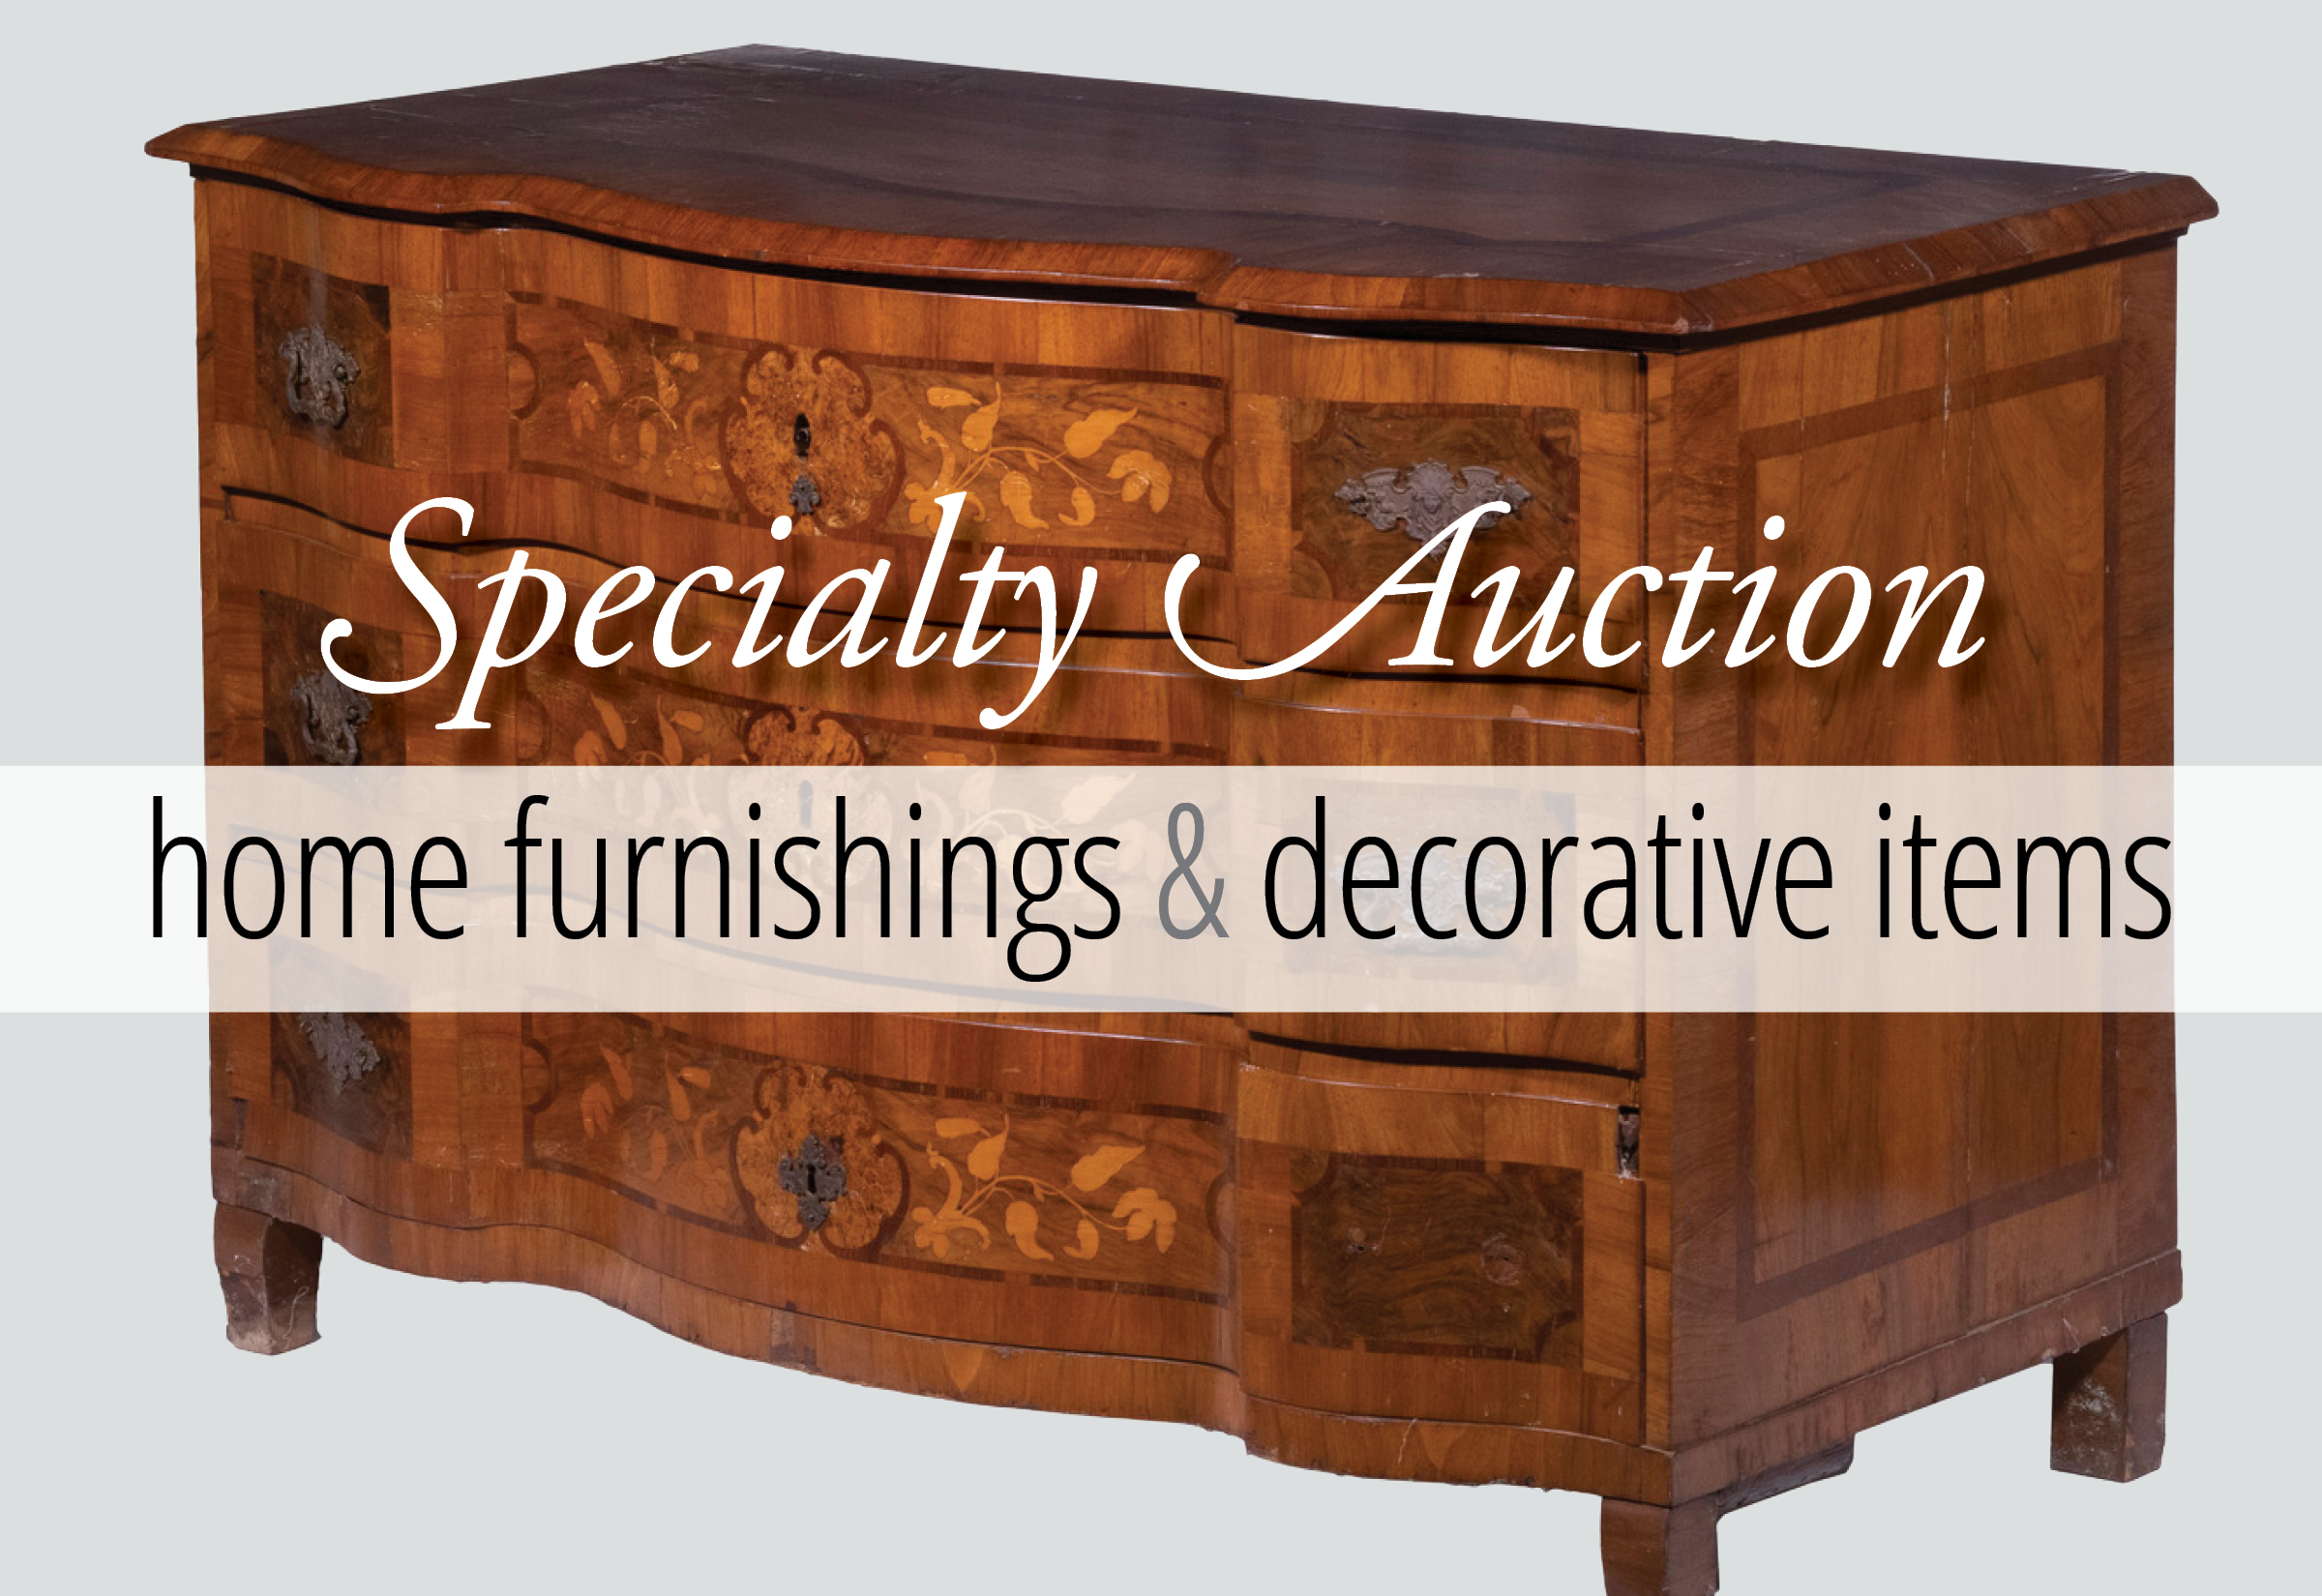 Home Decor & More - Specialty Sale